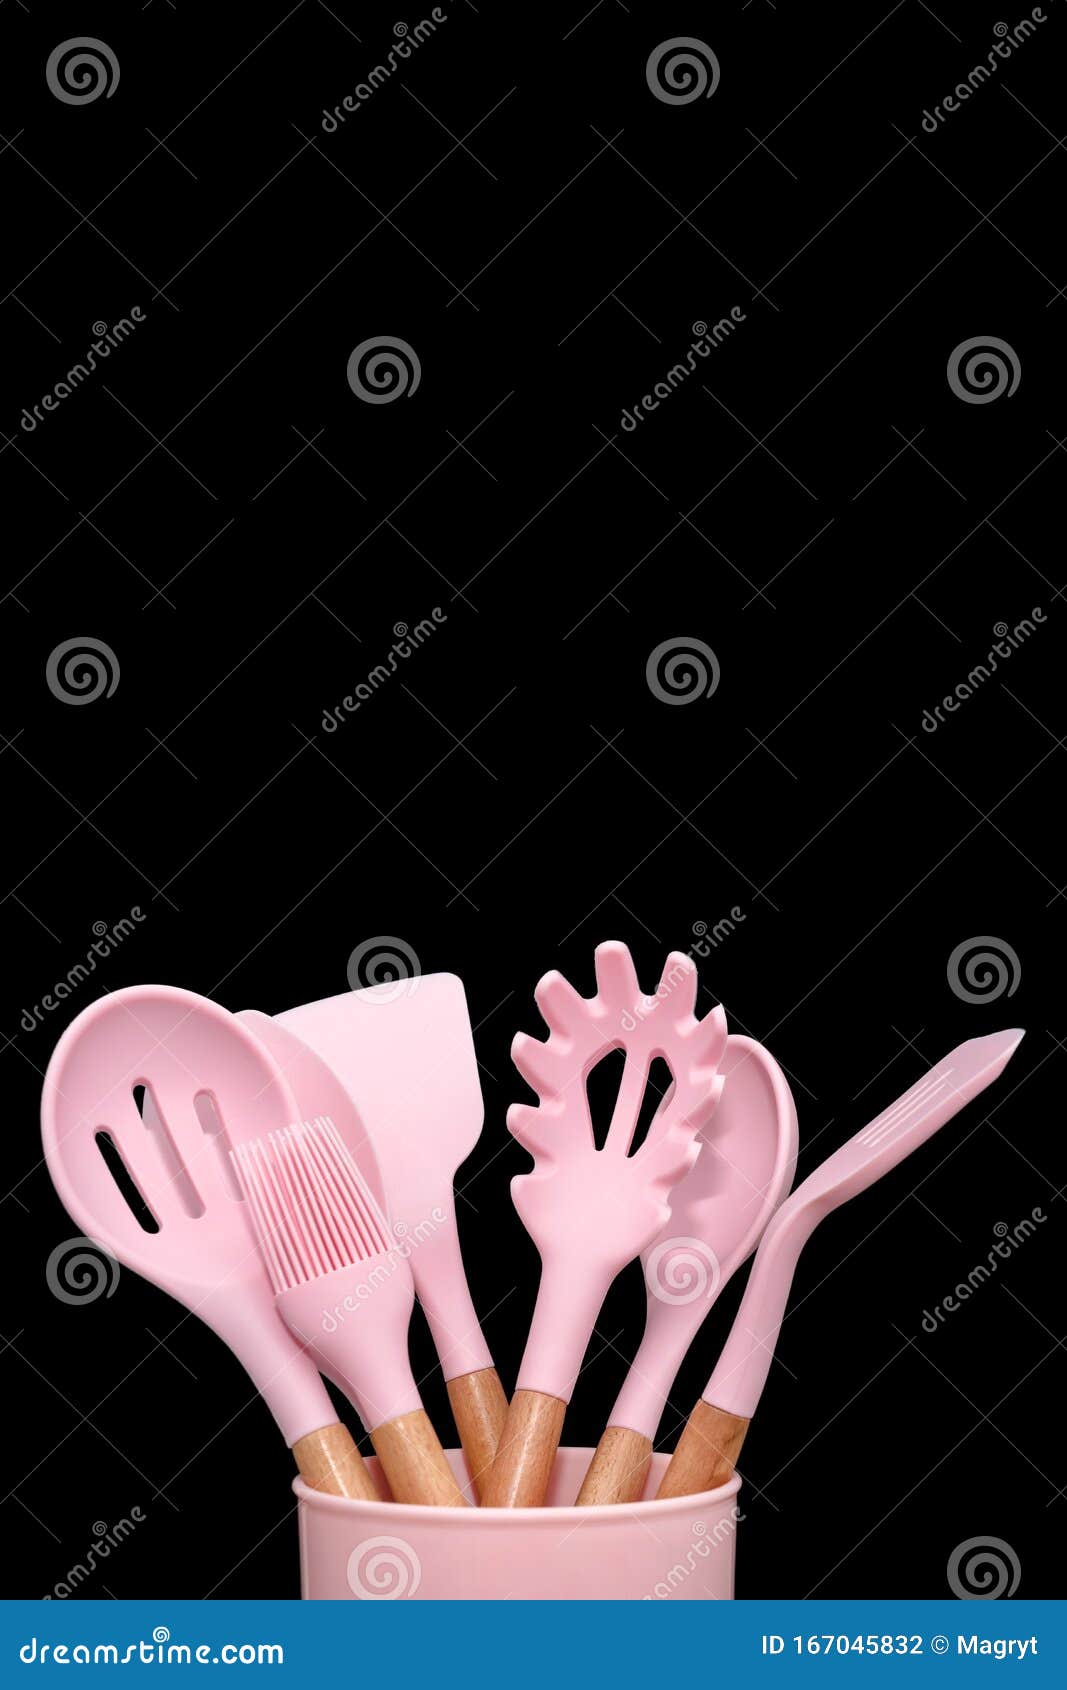 Kitchen utensils background with copyspace, home kitchen decor concept,  black kitchen tools, rubber accessories in container.Restaurant, cooking,  culinary, kitchen theme. Silicone spatulas and brushes Stock Photo